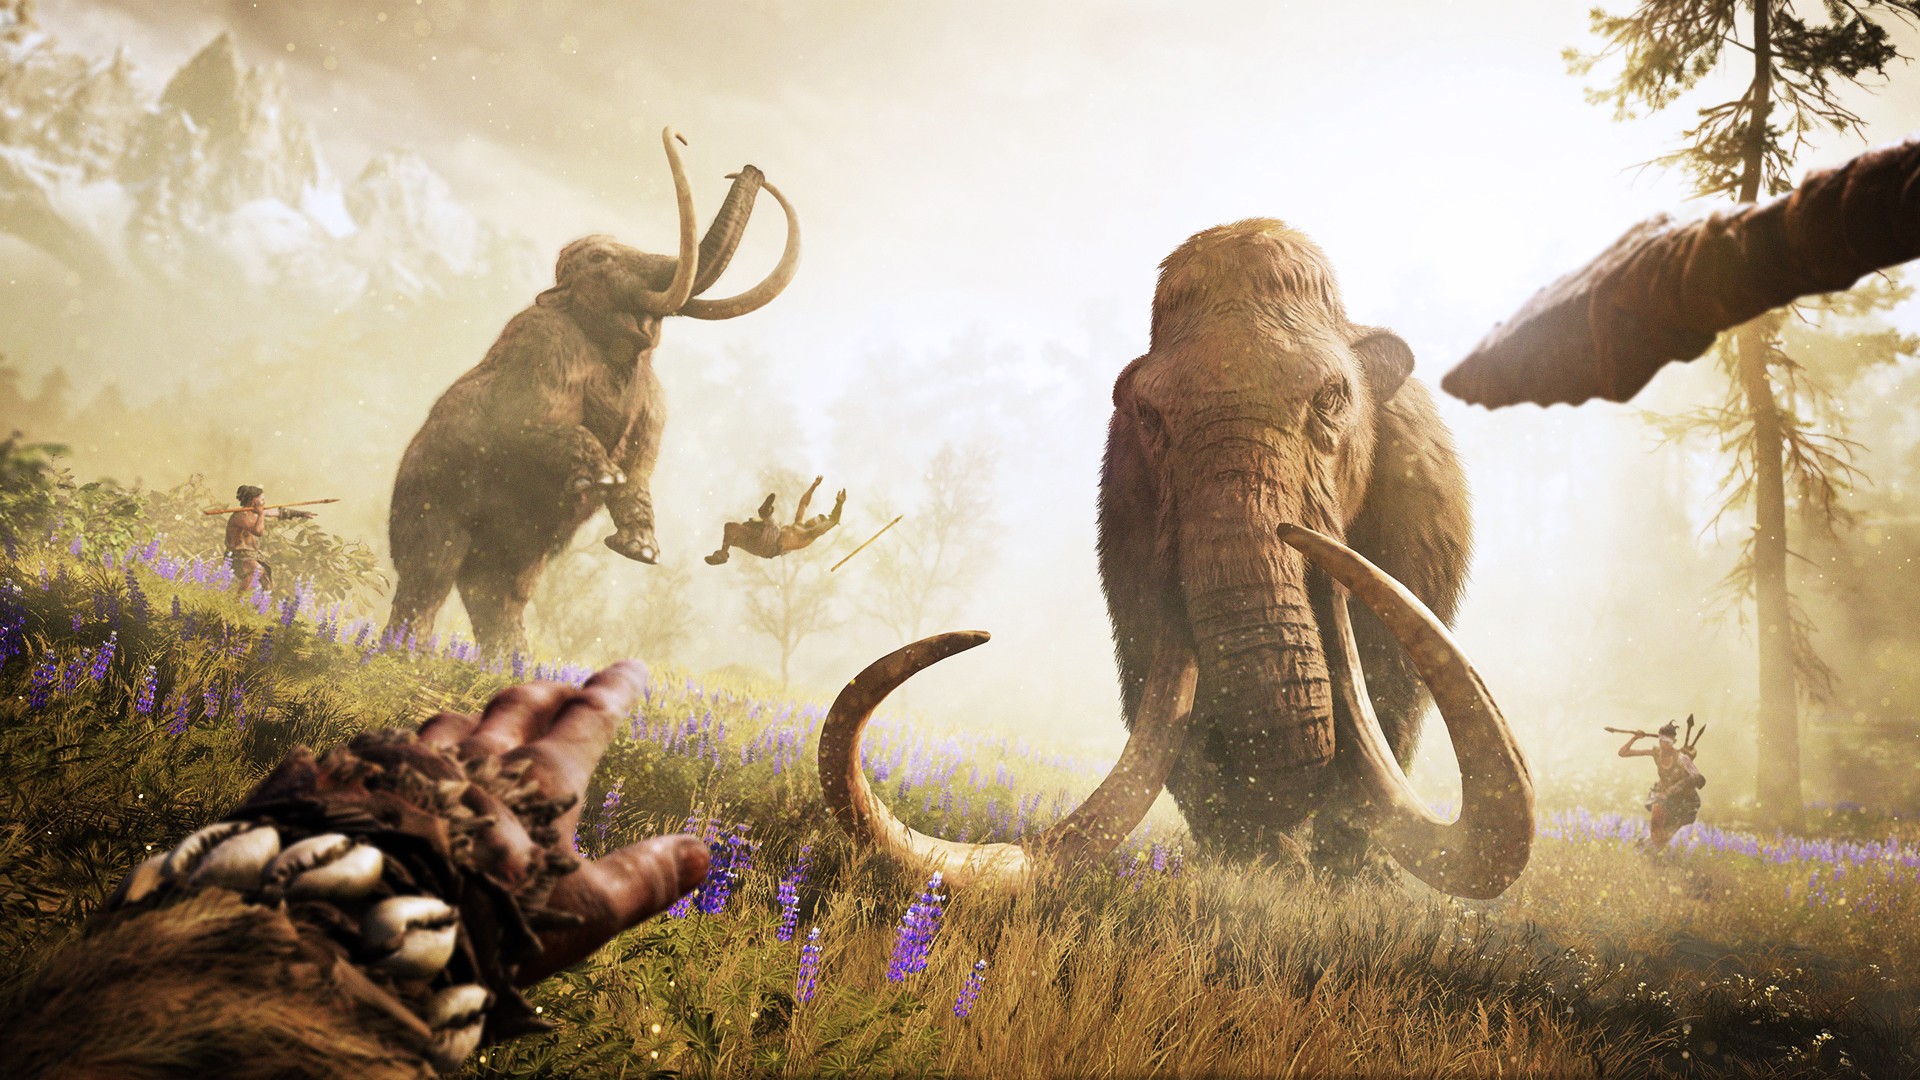 FarCry Primal Far Cry Primal Video Games 2016 Year Mammoths Ubisoft 1920x1080